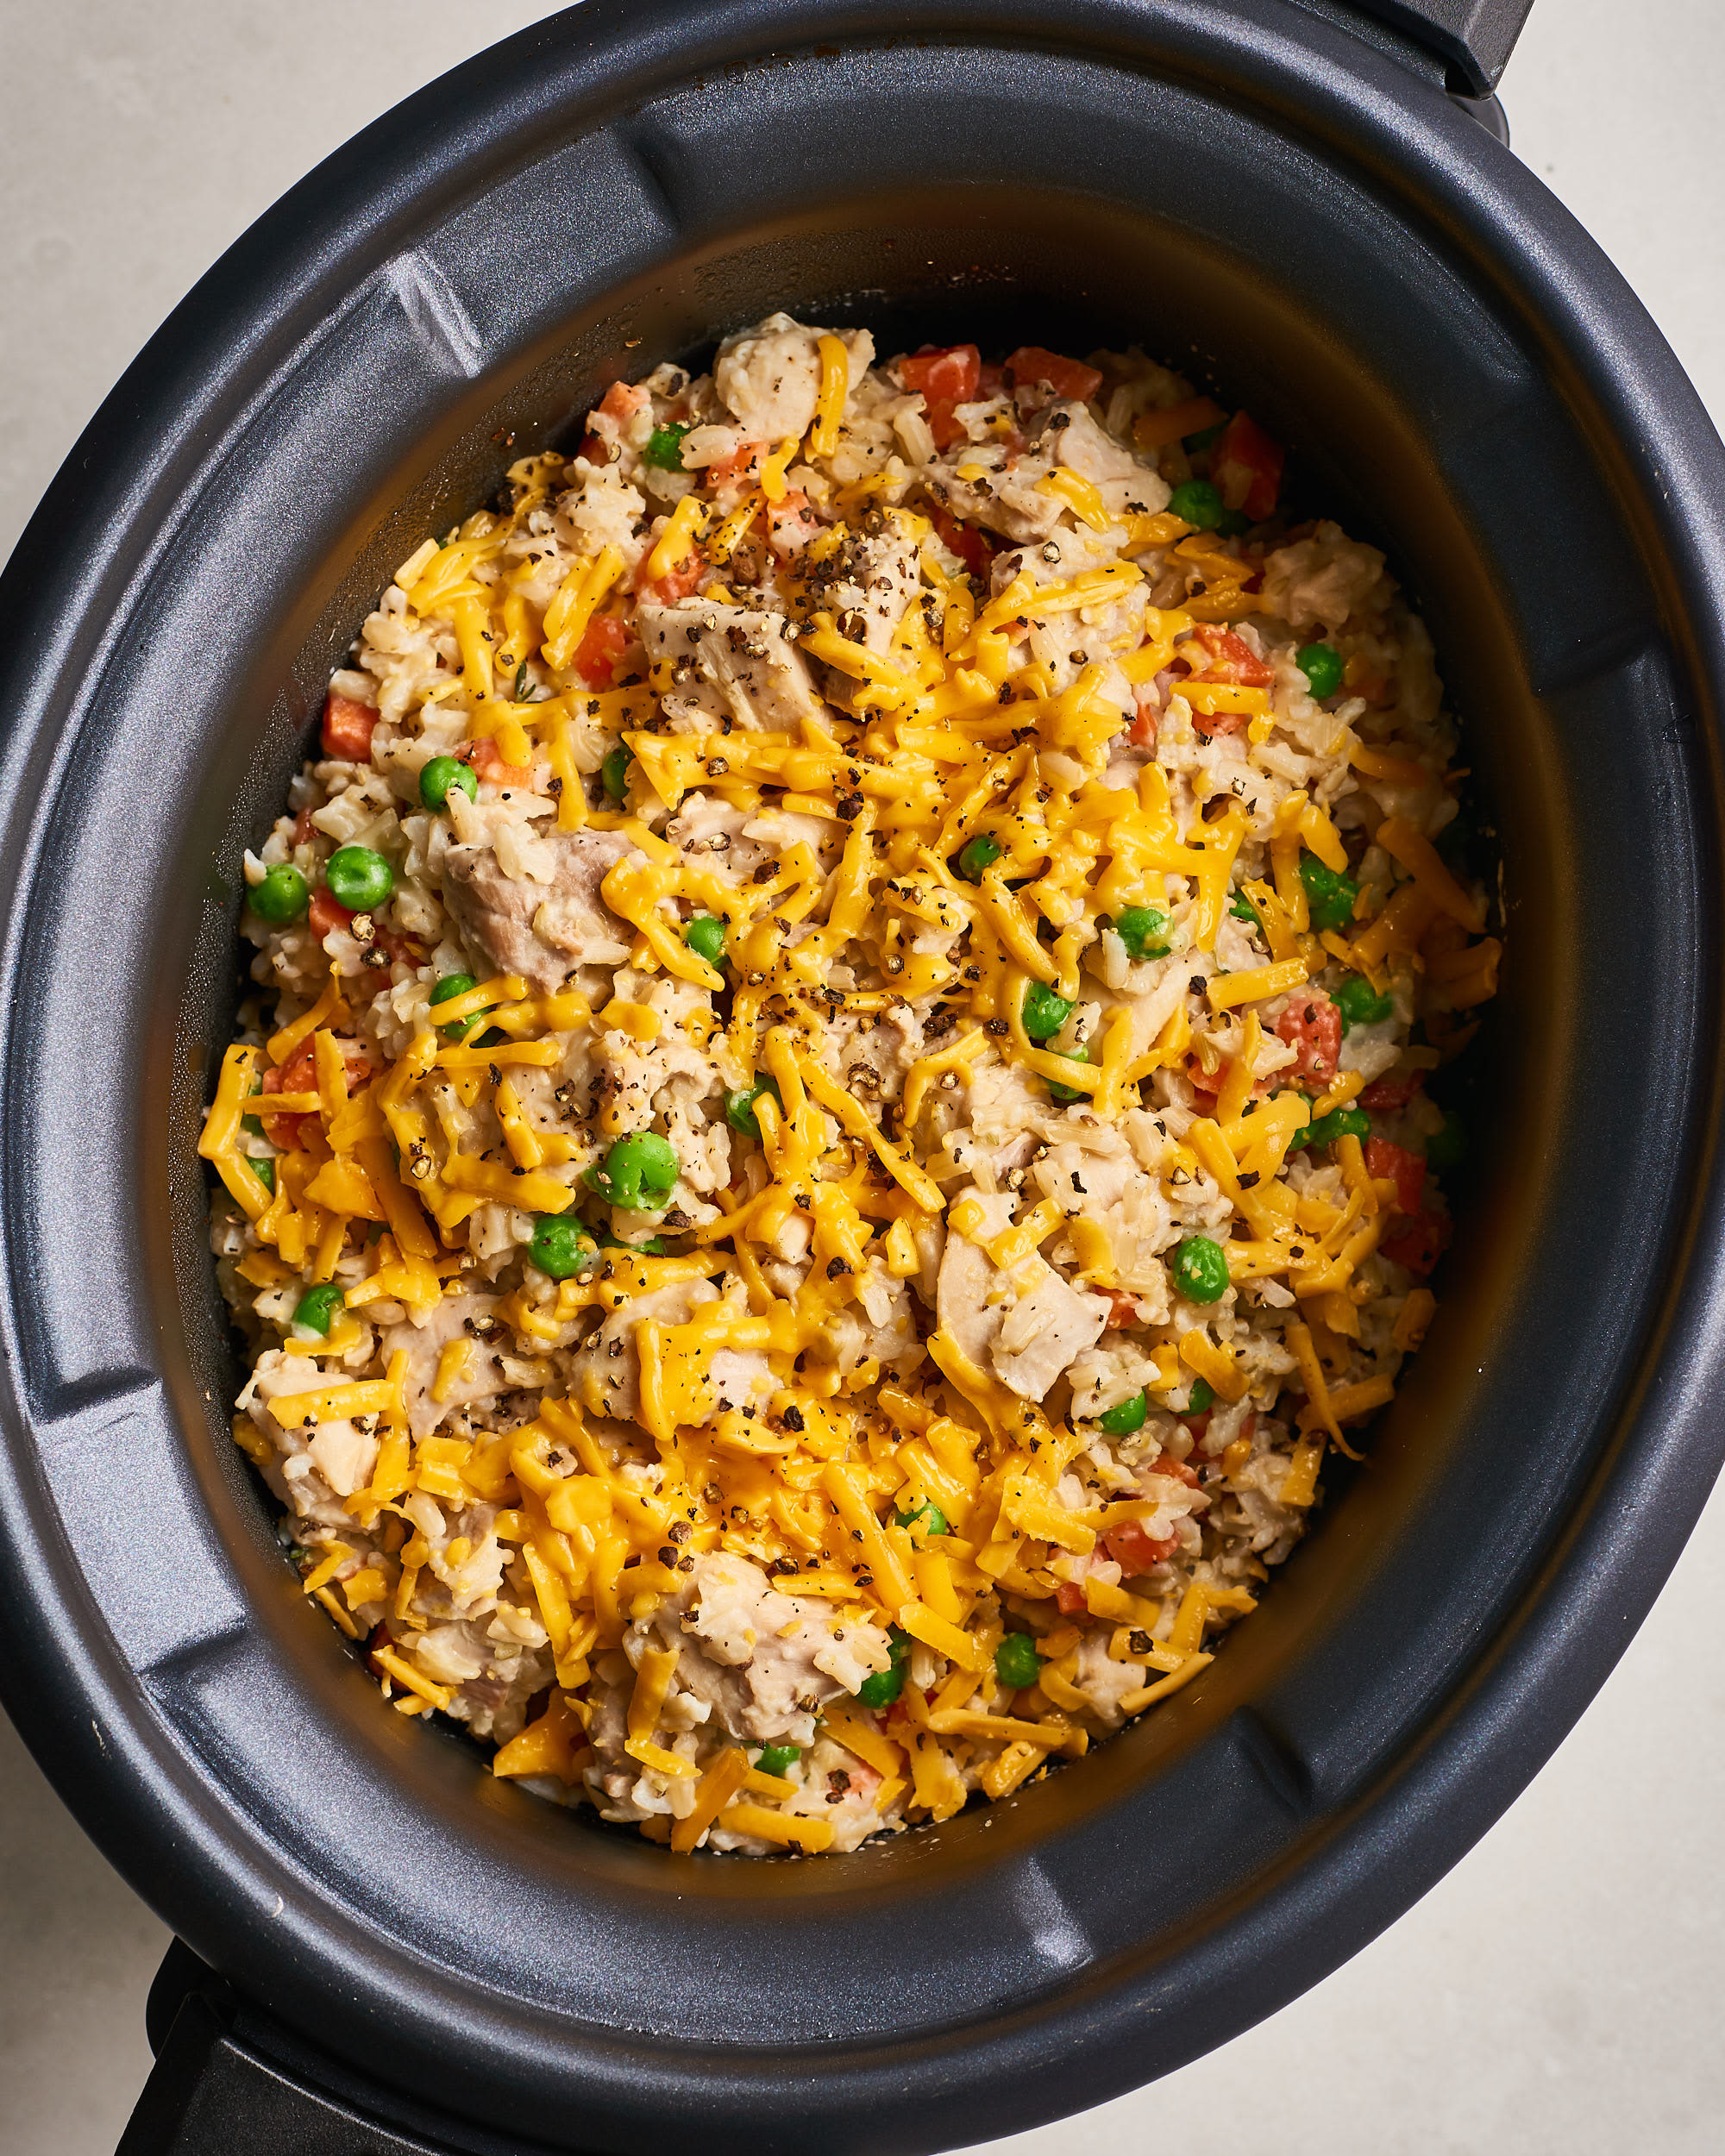 The Best Slow Cooker Chicken And Rice Recipe | Kitchn